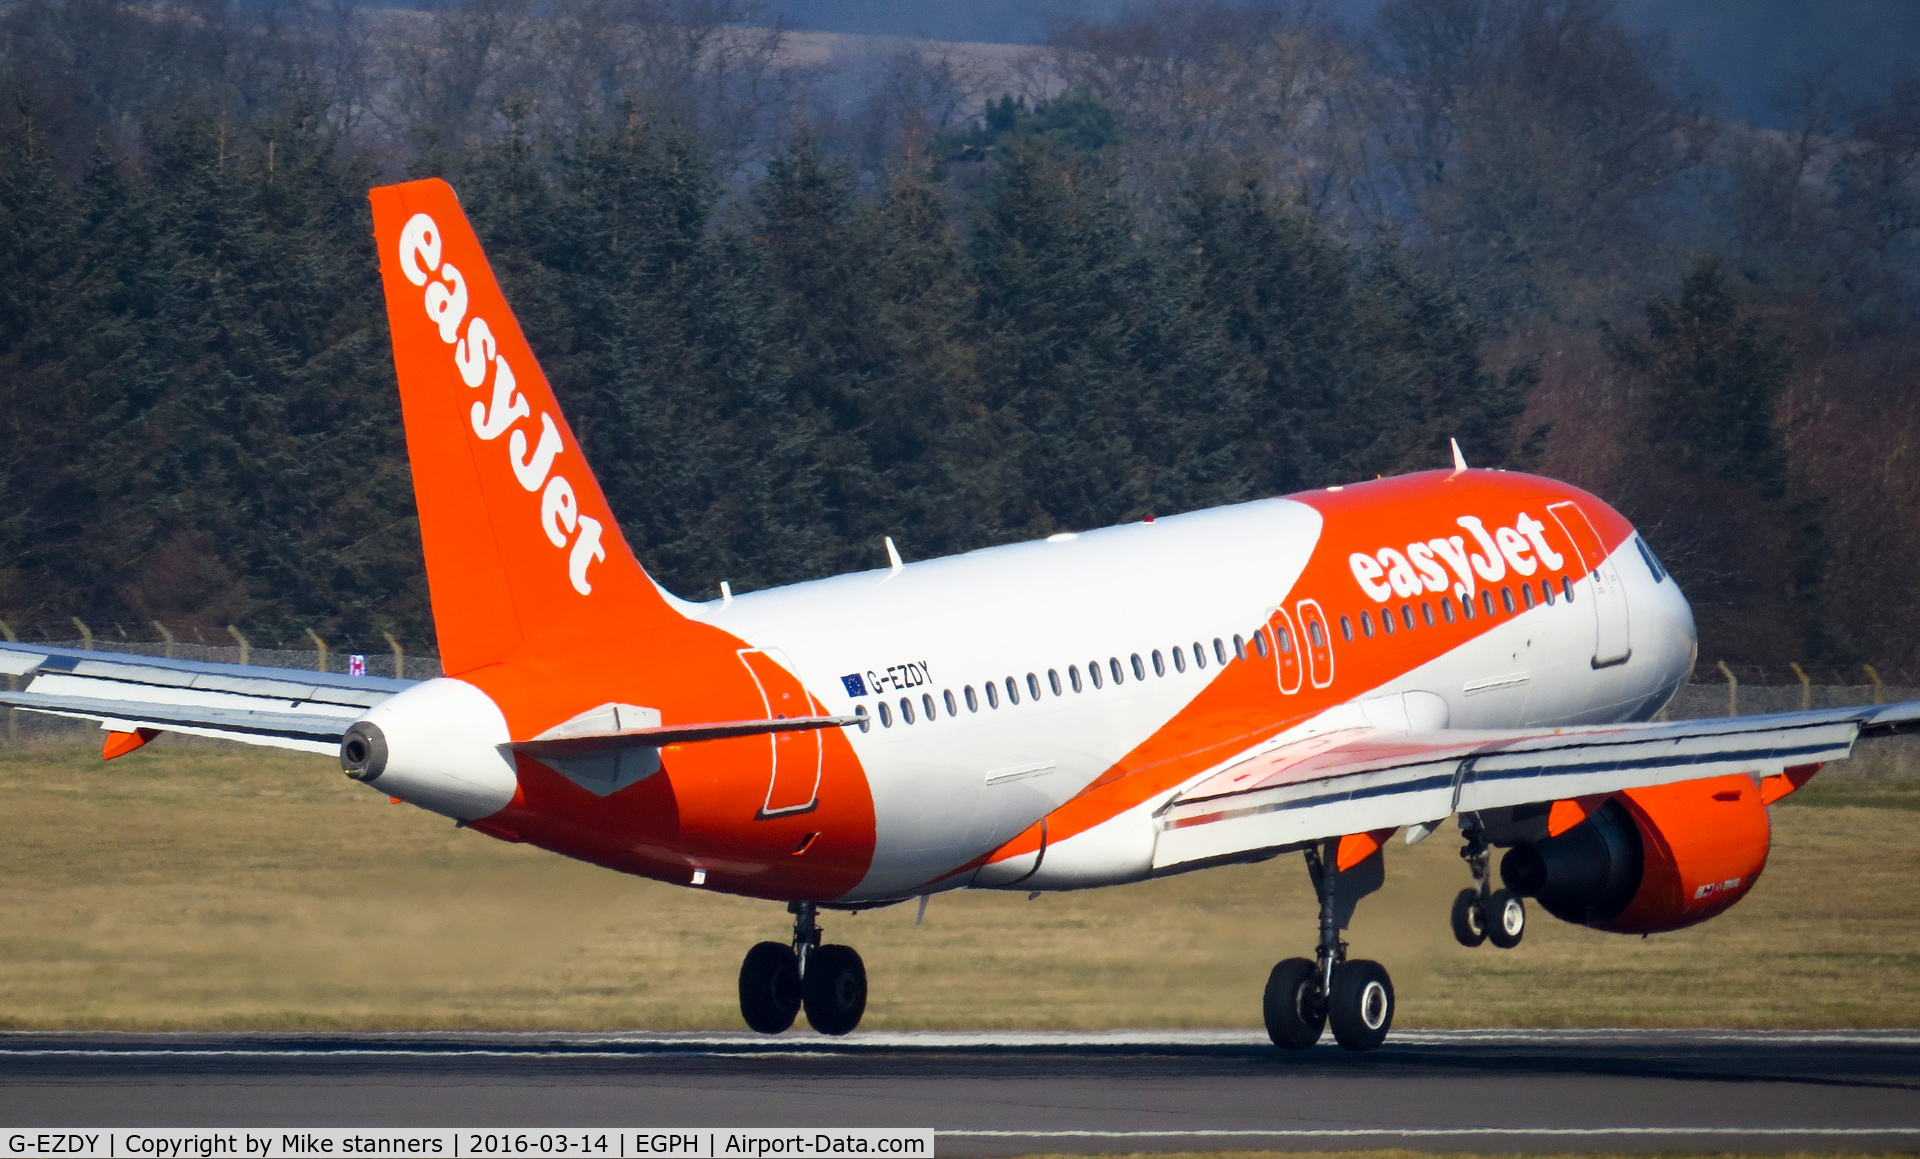 G-EZDY, 2008 Airbus A319-111 C/N 3763, 